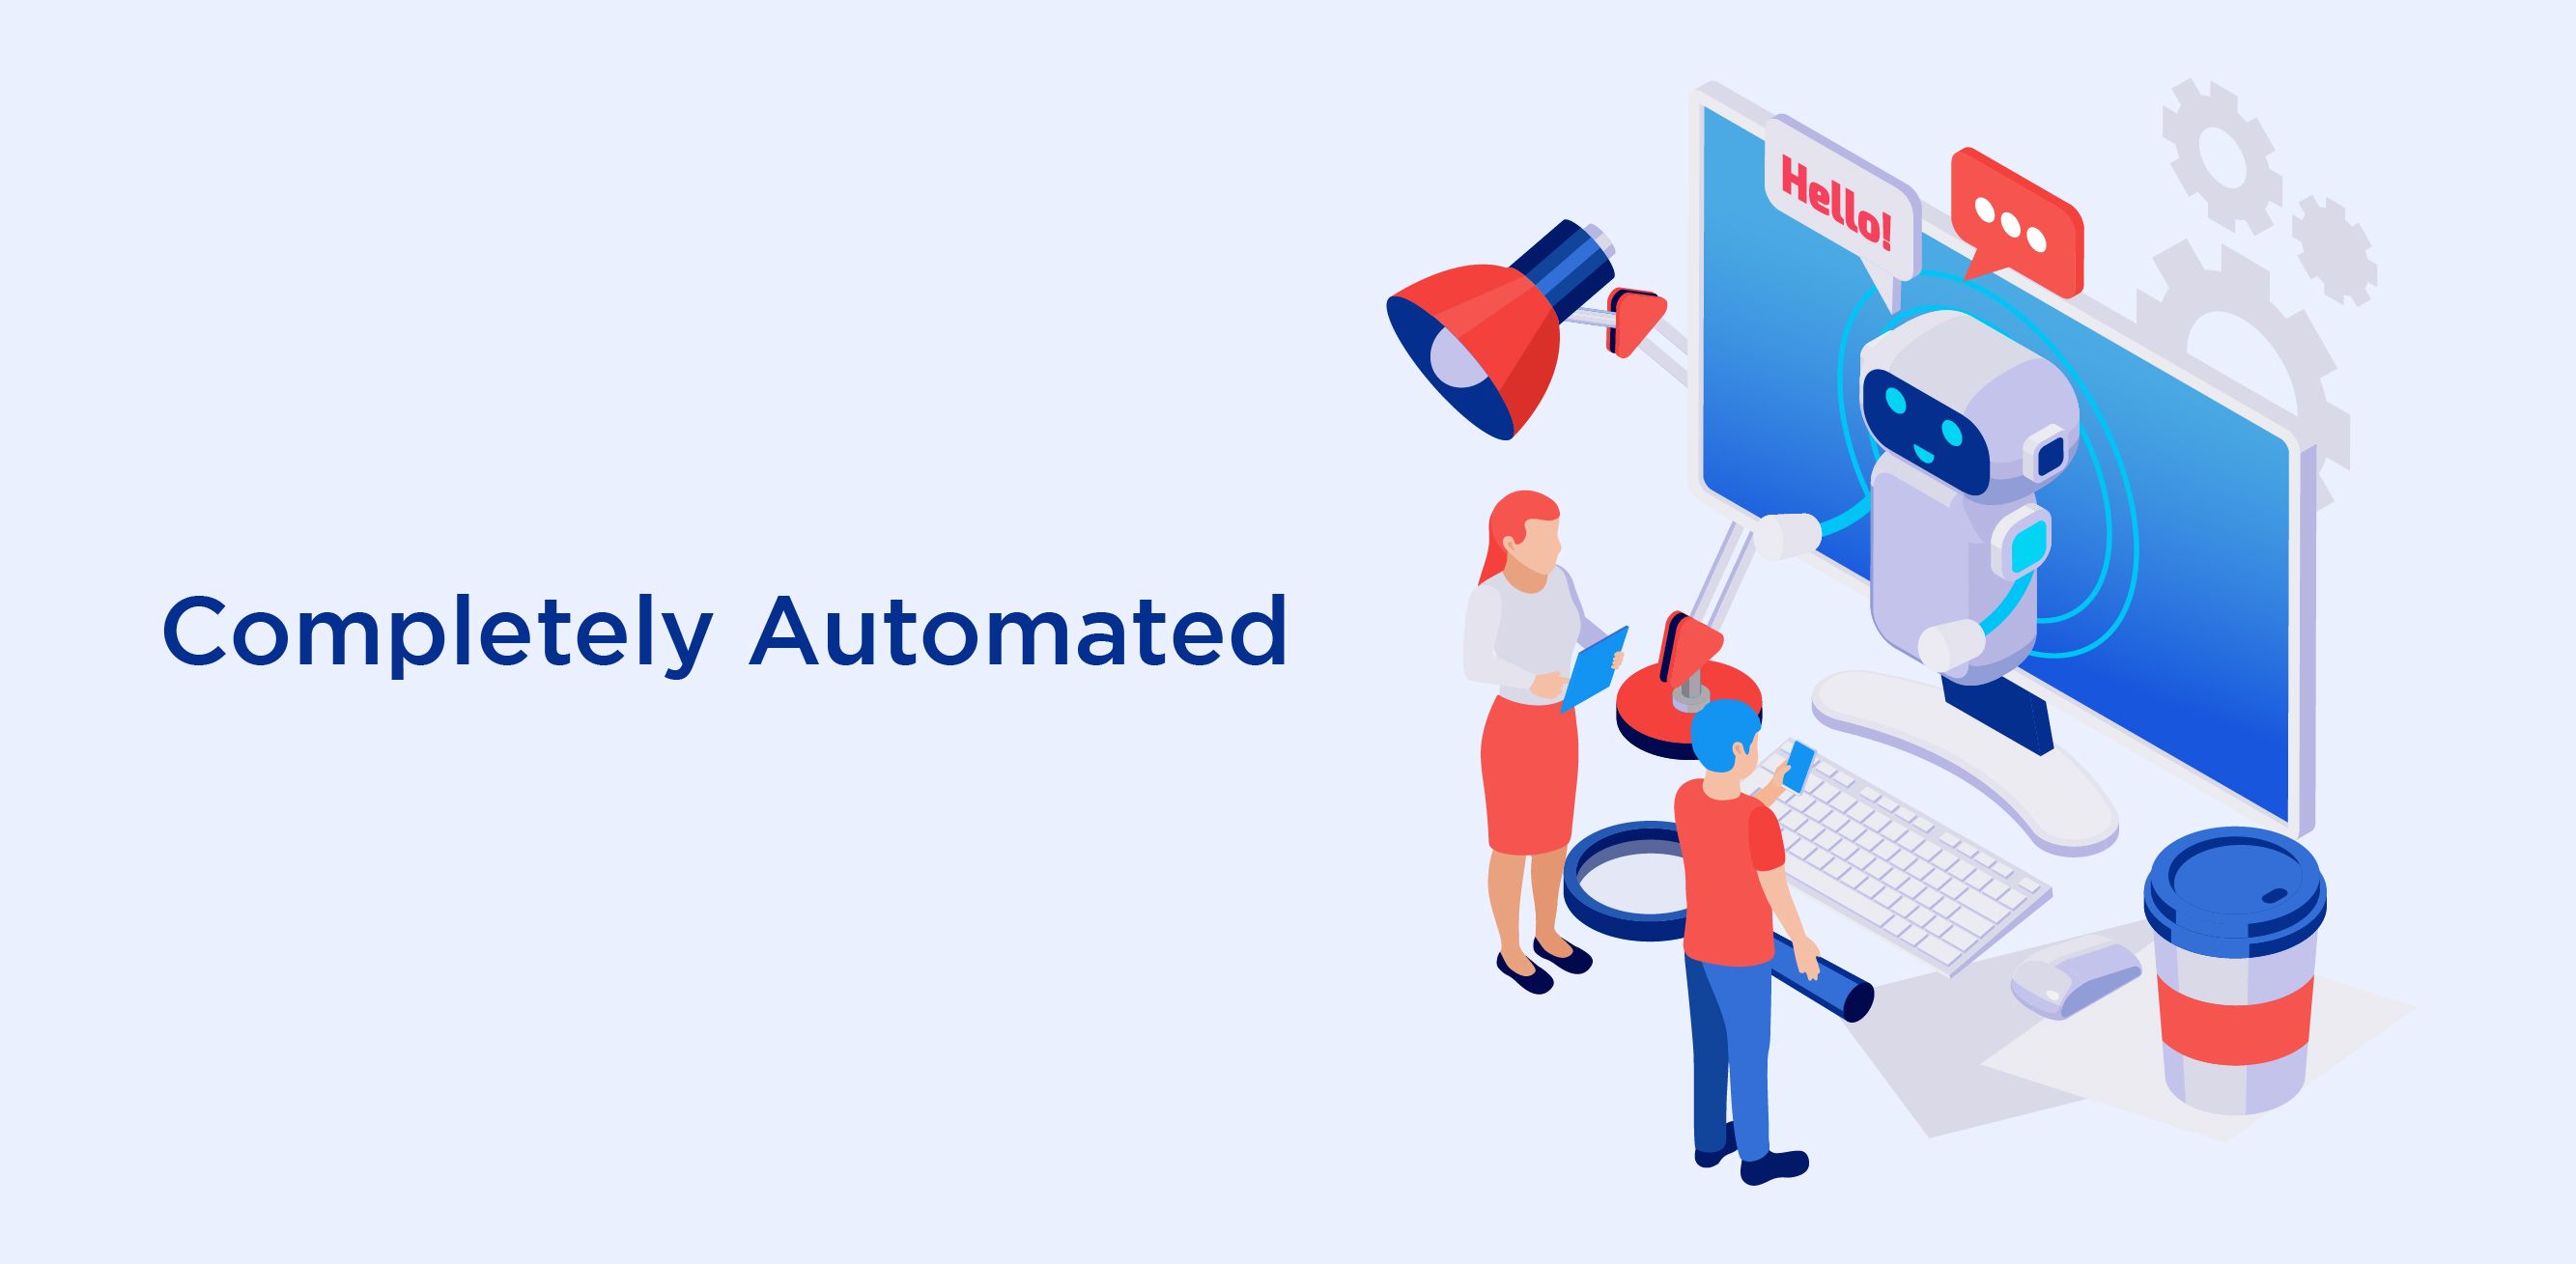 Completely Automated, Round-the-Clock Service to Customers